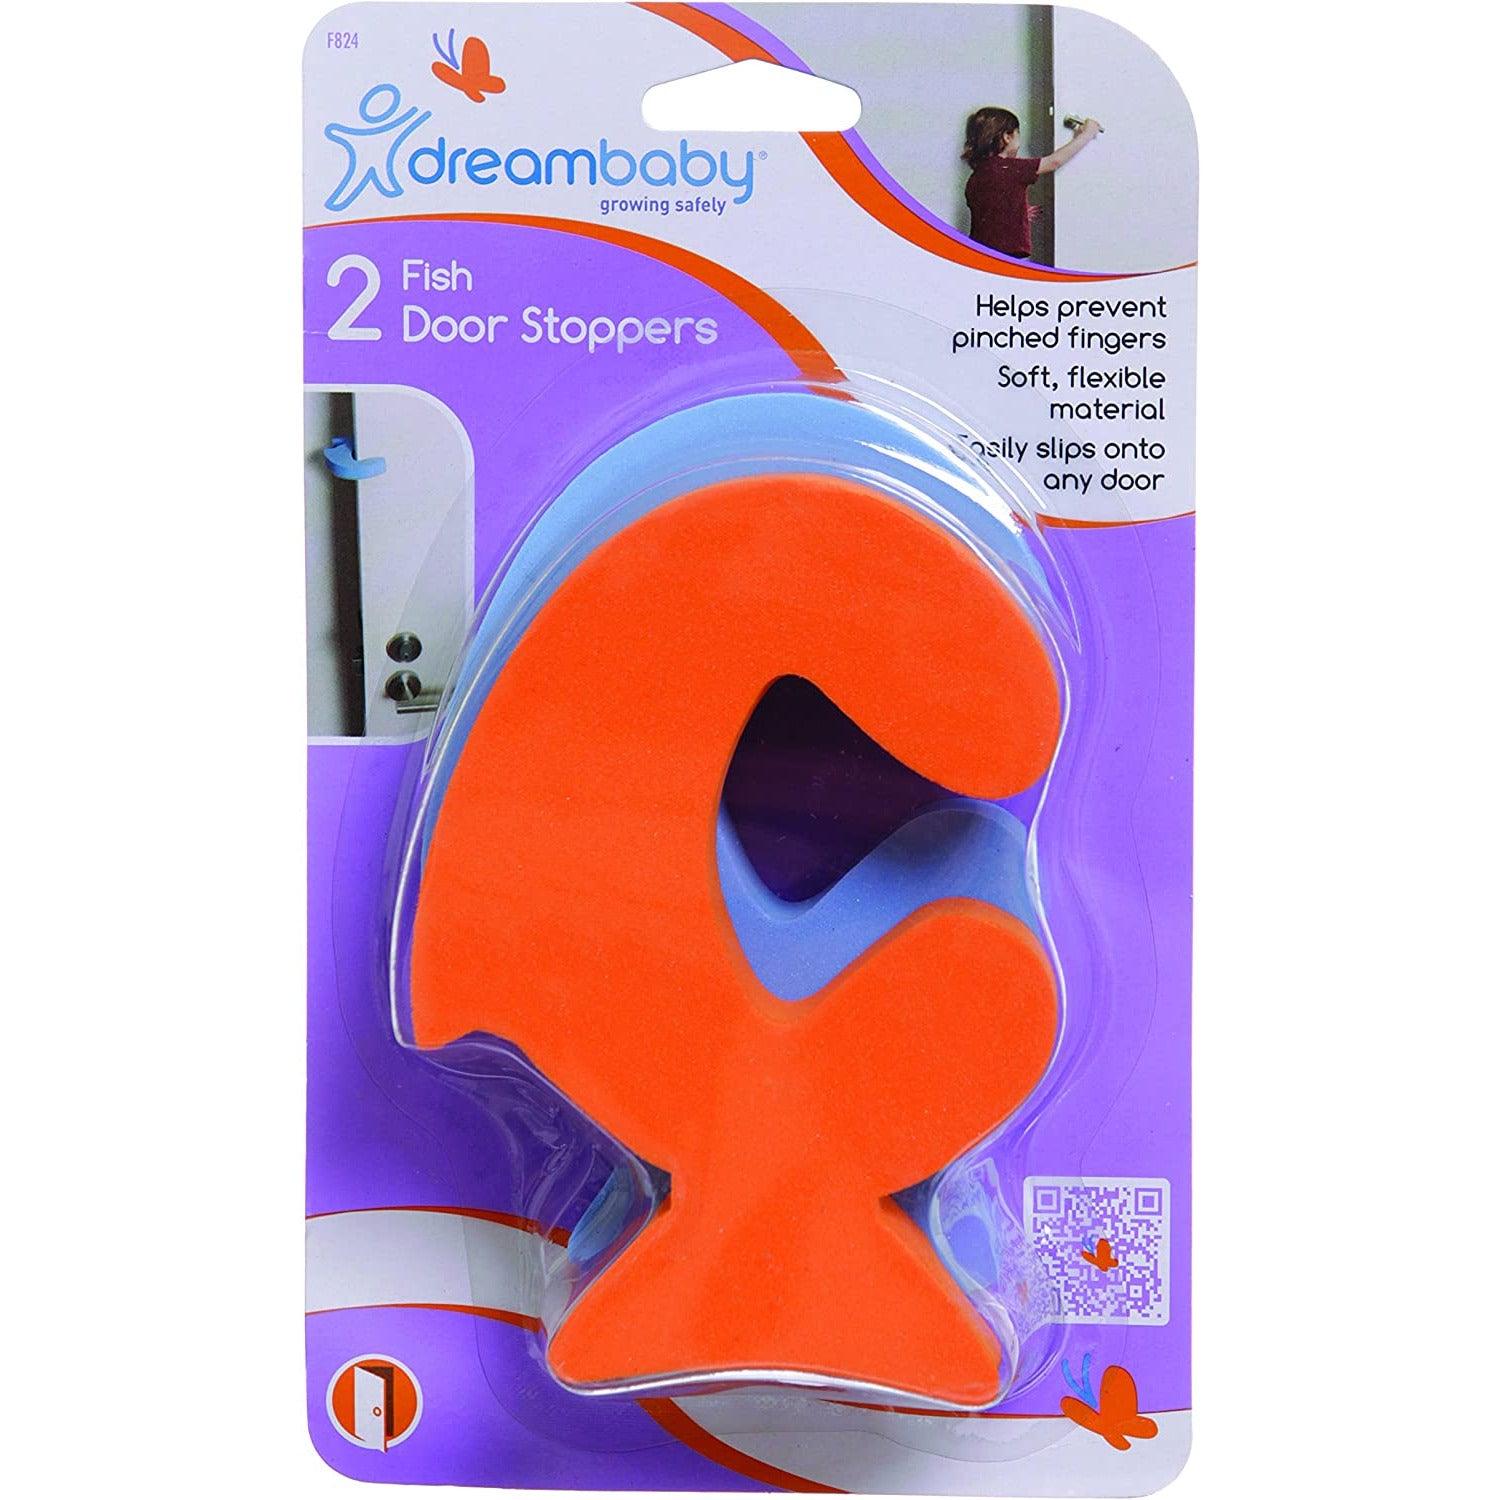 Dream baby G824 Set of 2 Fish Shaped Door Stoppers - BumbleToys - 0-24 Months, Babies, Baby Saftey & Health, Boys, Cecil, Girls